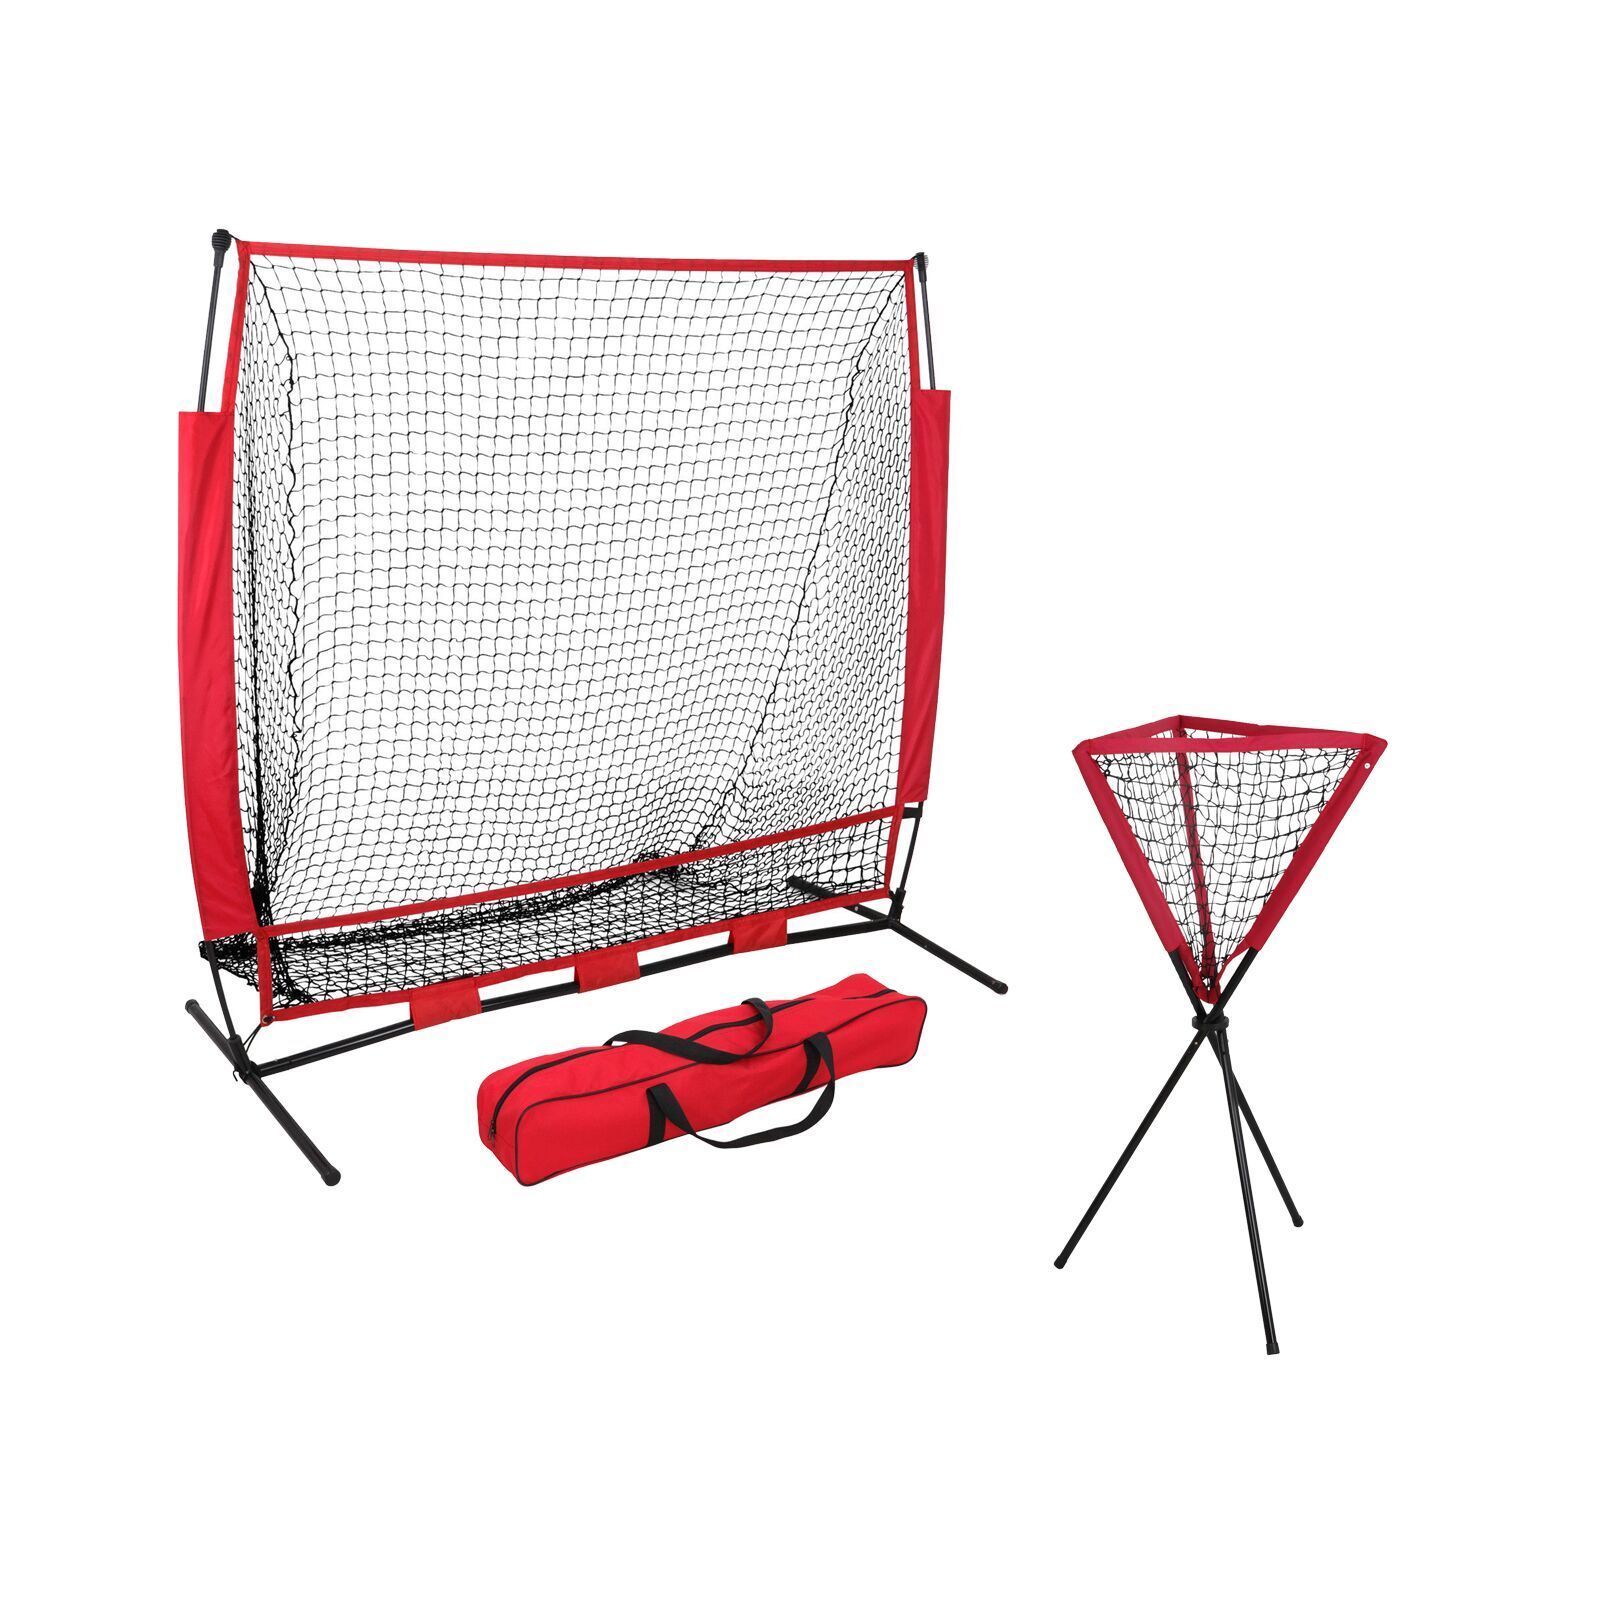 Primary image for 5X5 Ft Portable Baseball Practice Hitting Training Net W/ Bag + Ball Caddy